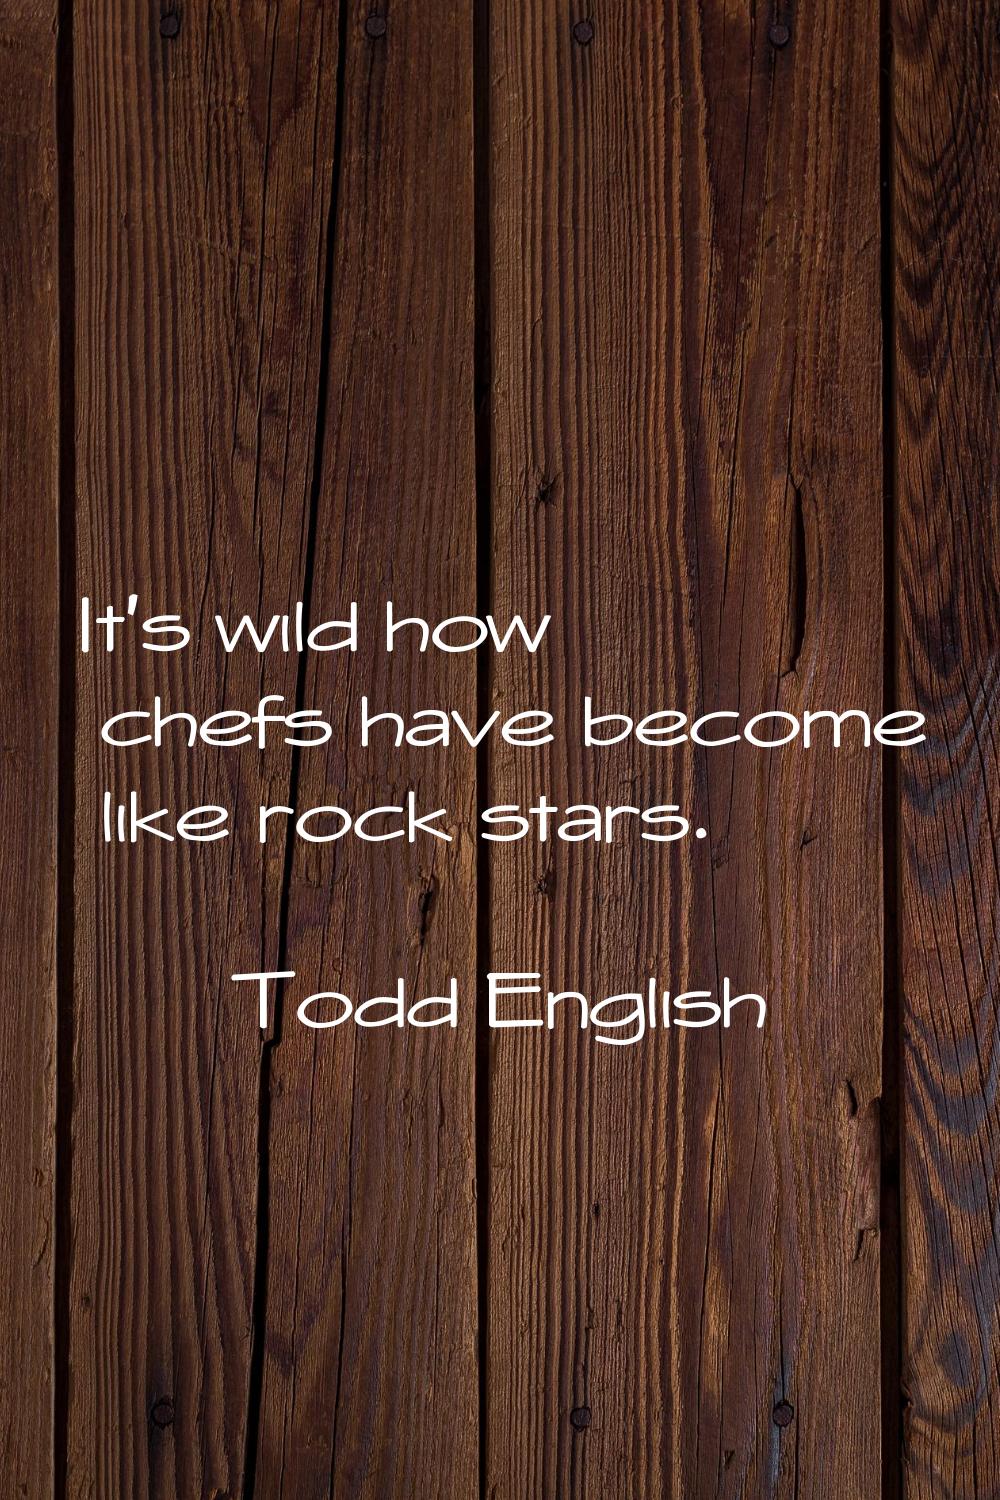 It's wild how chefs have become like rock stars.